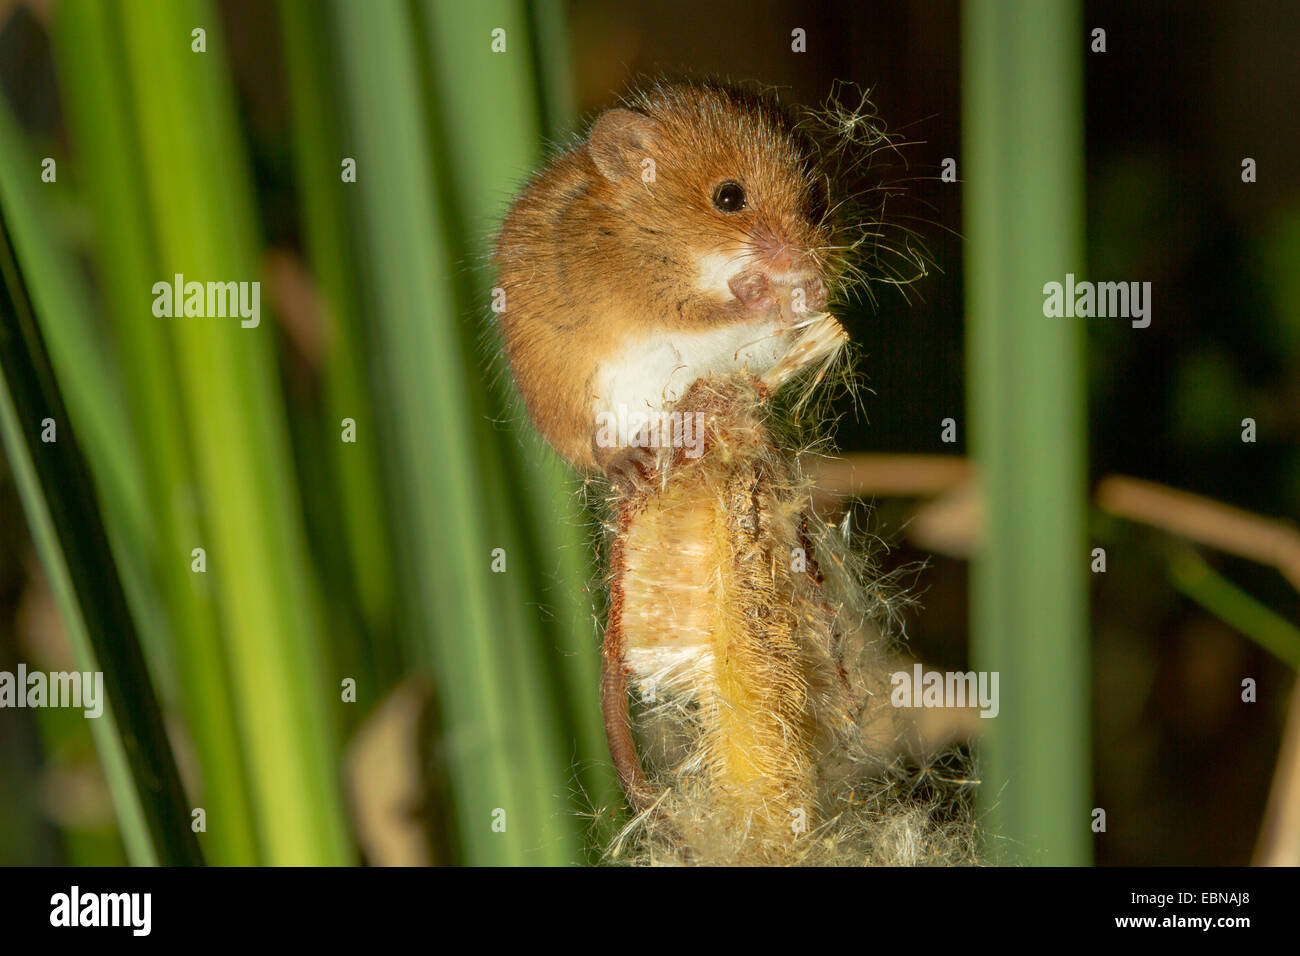 Old World harvest mouse (Micromys minutus), sitting on cat-tail feeding seed Stock Photo